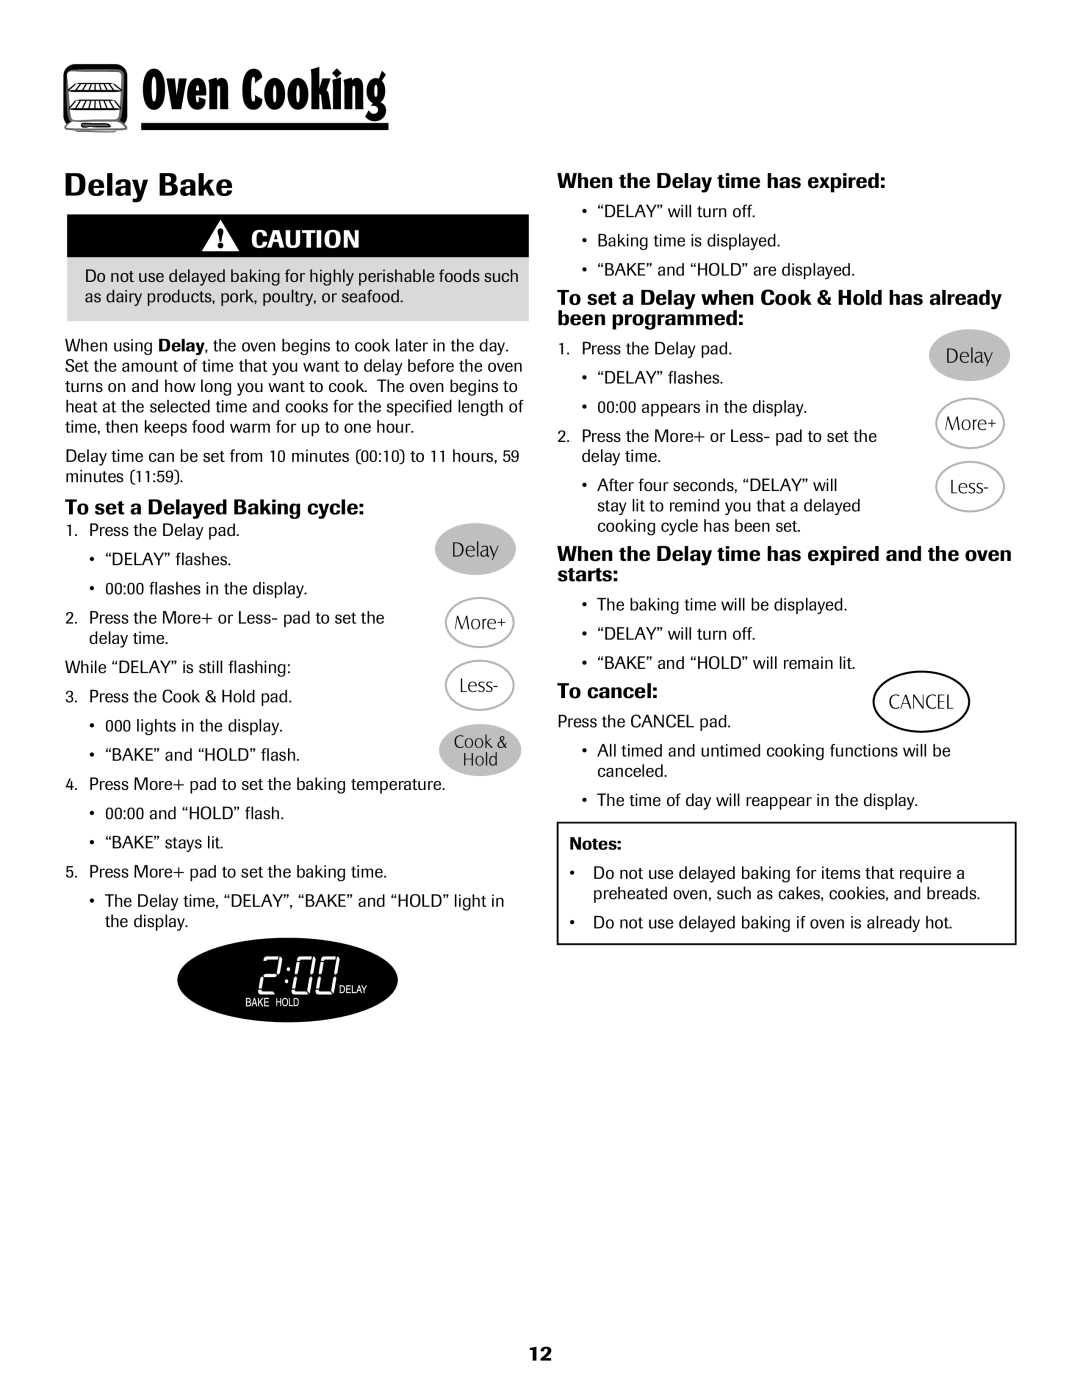 Maytag 8113P424-60 Delay Bake, To set a Delayed Baking cycle, When the Delay time has expired, To cancel, Oven Cooking 